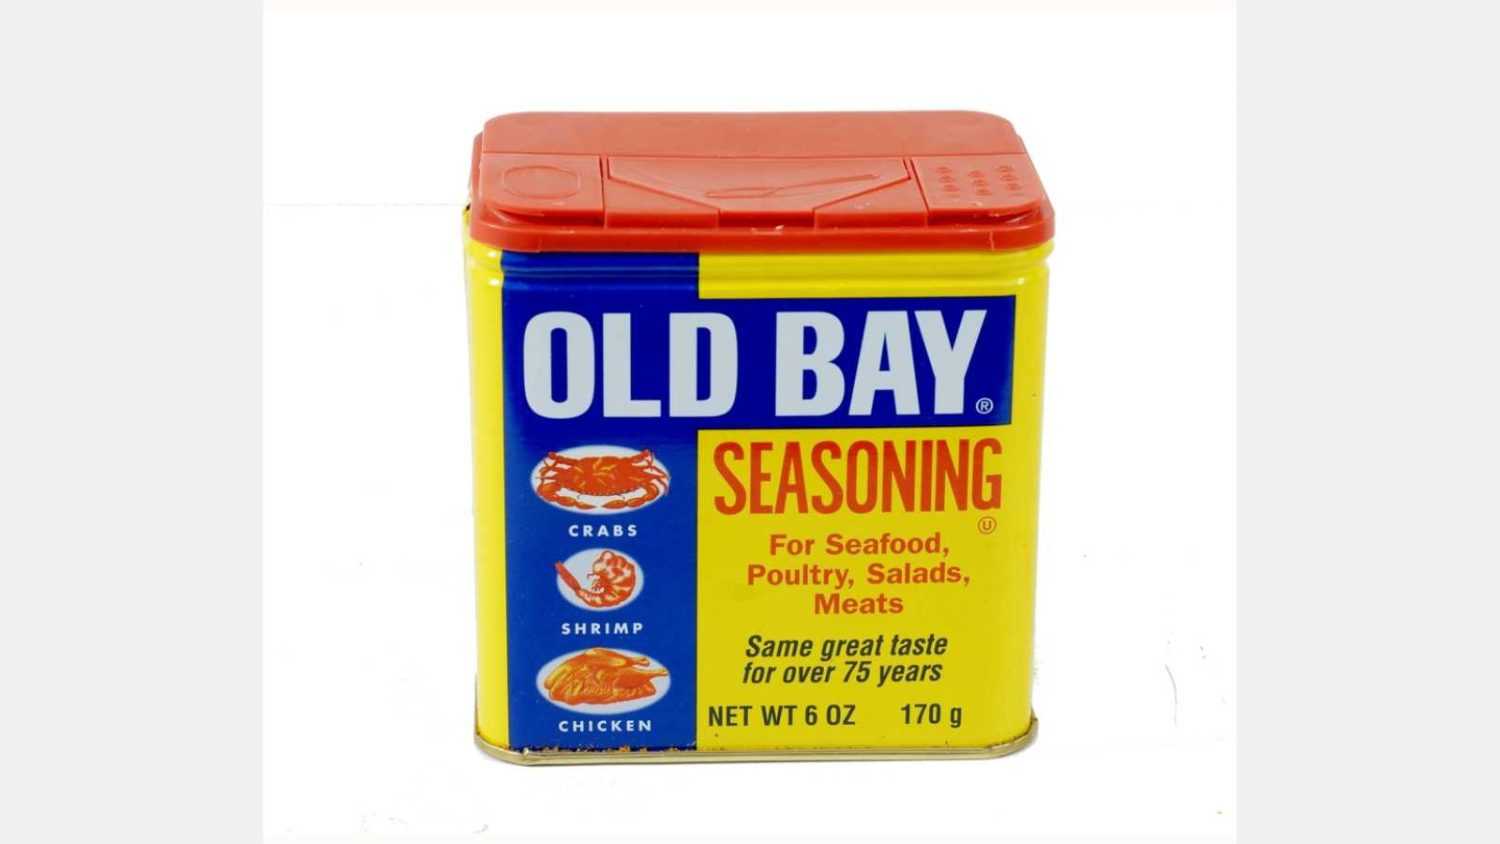 WEST PALM BEACH, FLORIDA - January 29, 2015: A can of Old Bay Seasoning made by McCormick in the Chesapeake Bay area in Maryland. The classic can is yellow with blue and red accents.